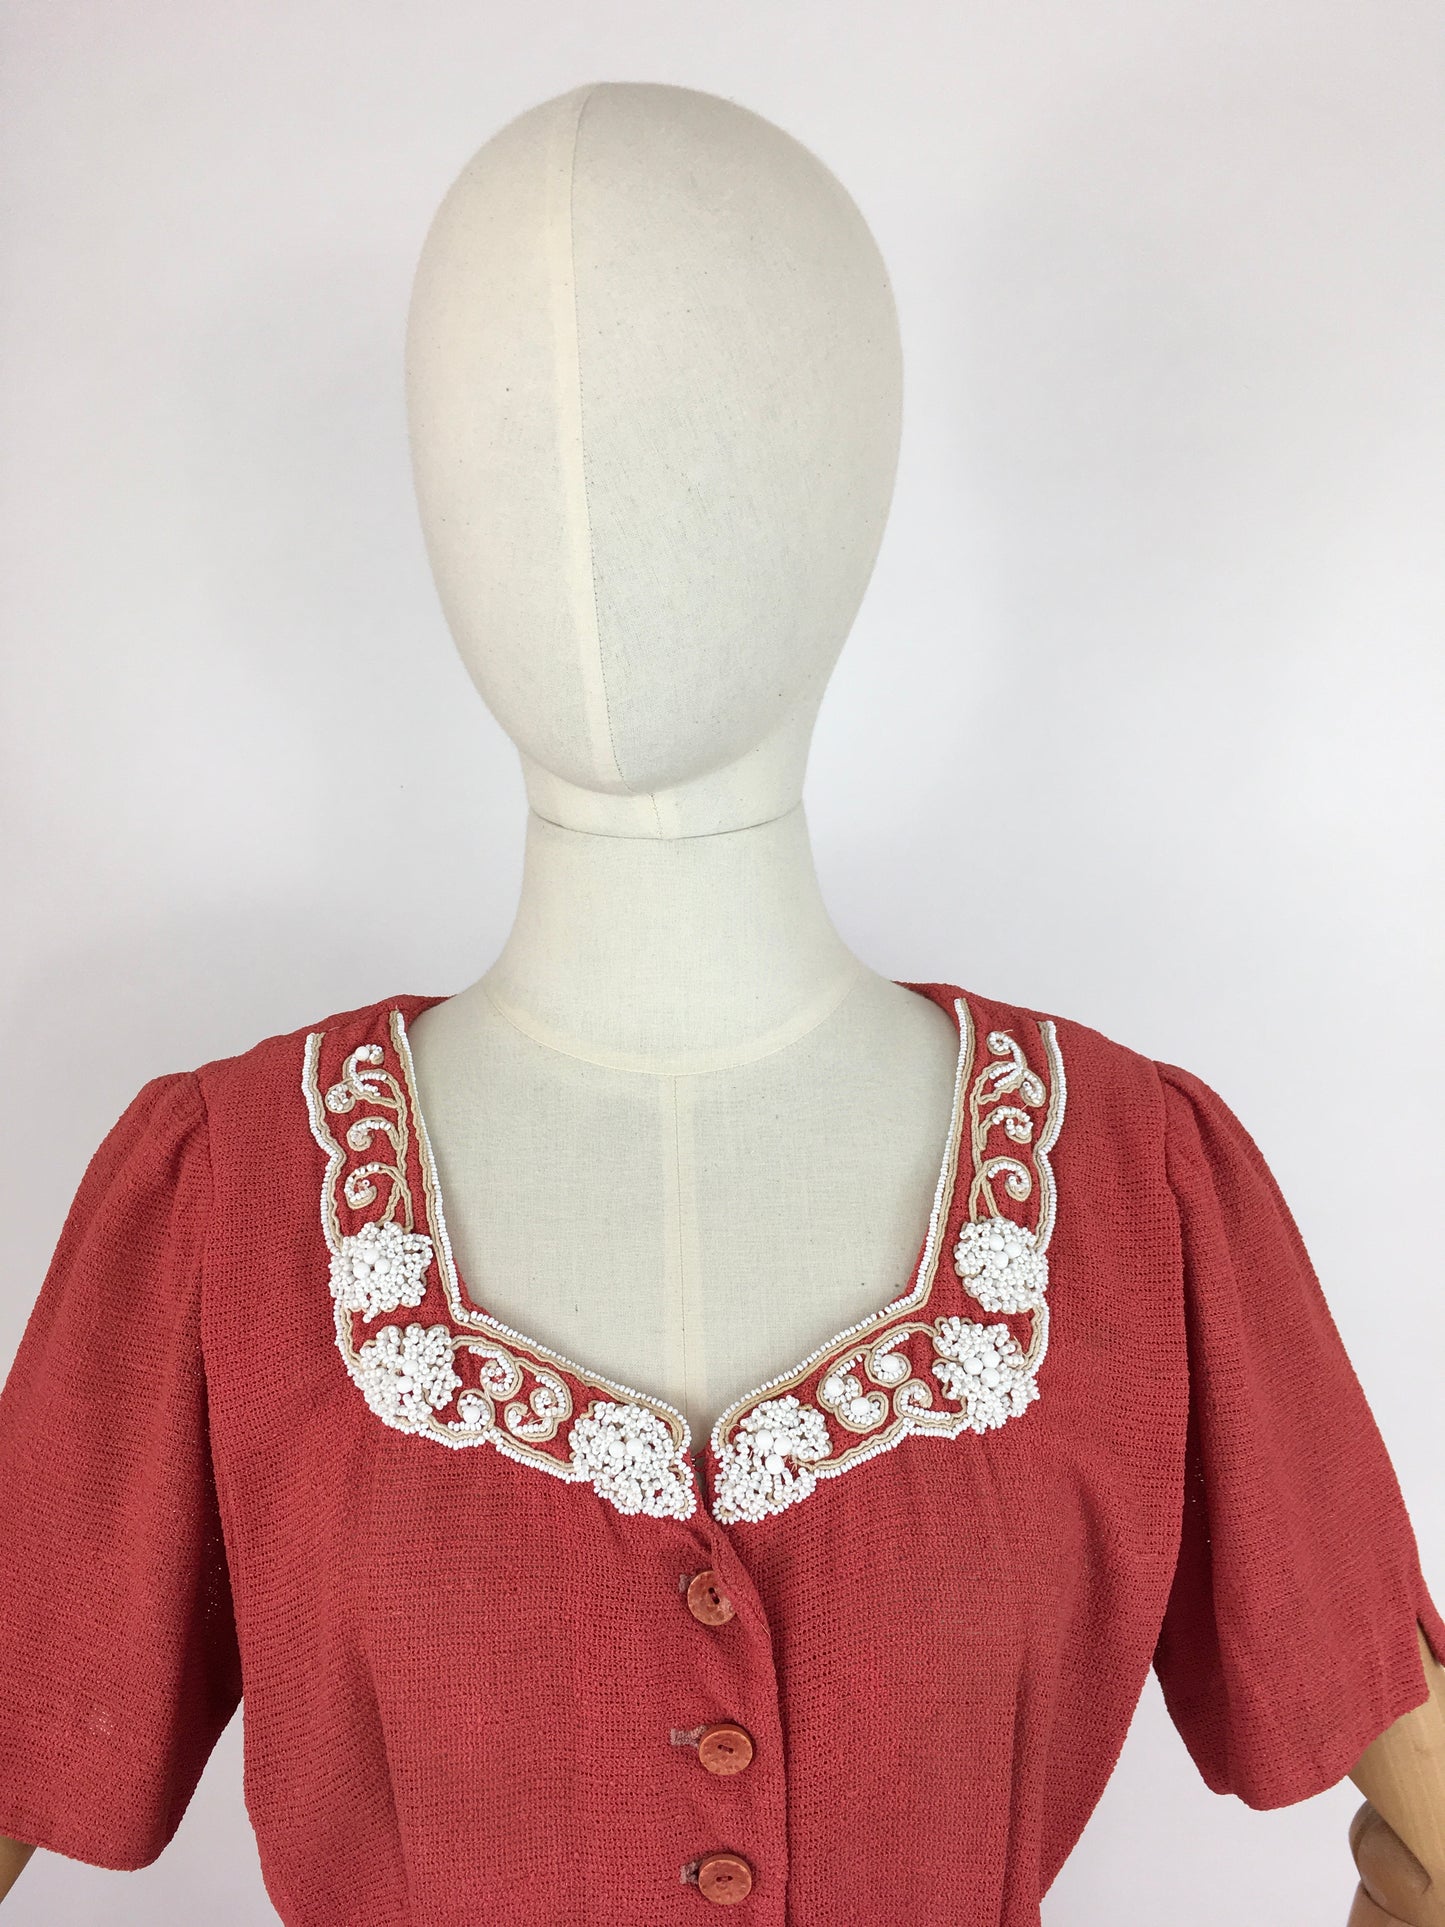 Original 1940’s Dress By ‘ Travelcraft by Sportscraft’ - In a Beautiful Deep Coral with White Floral Beadwork